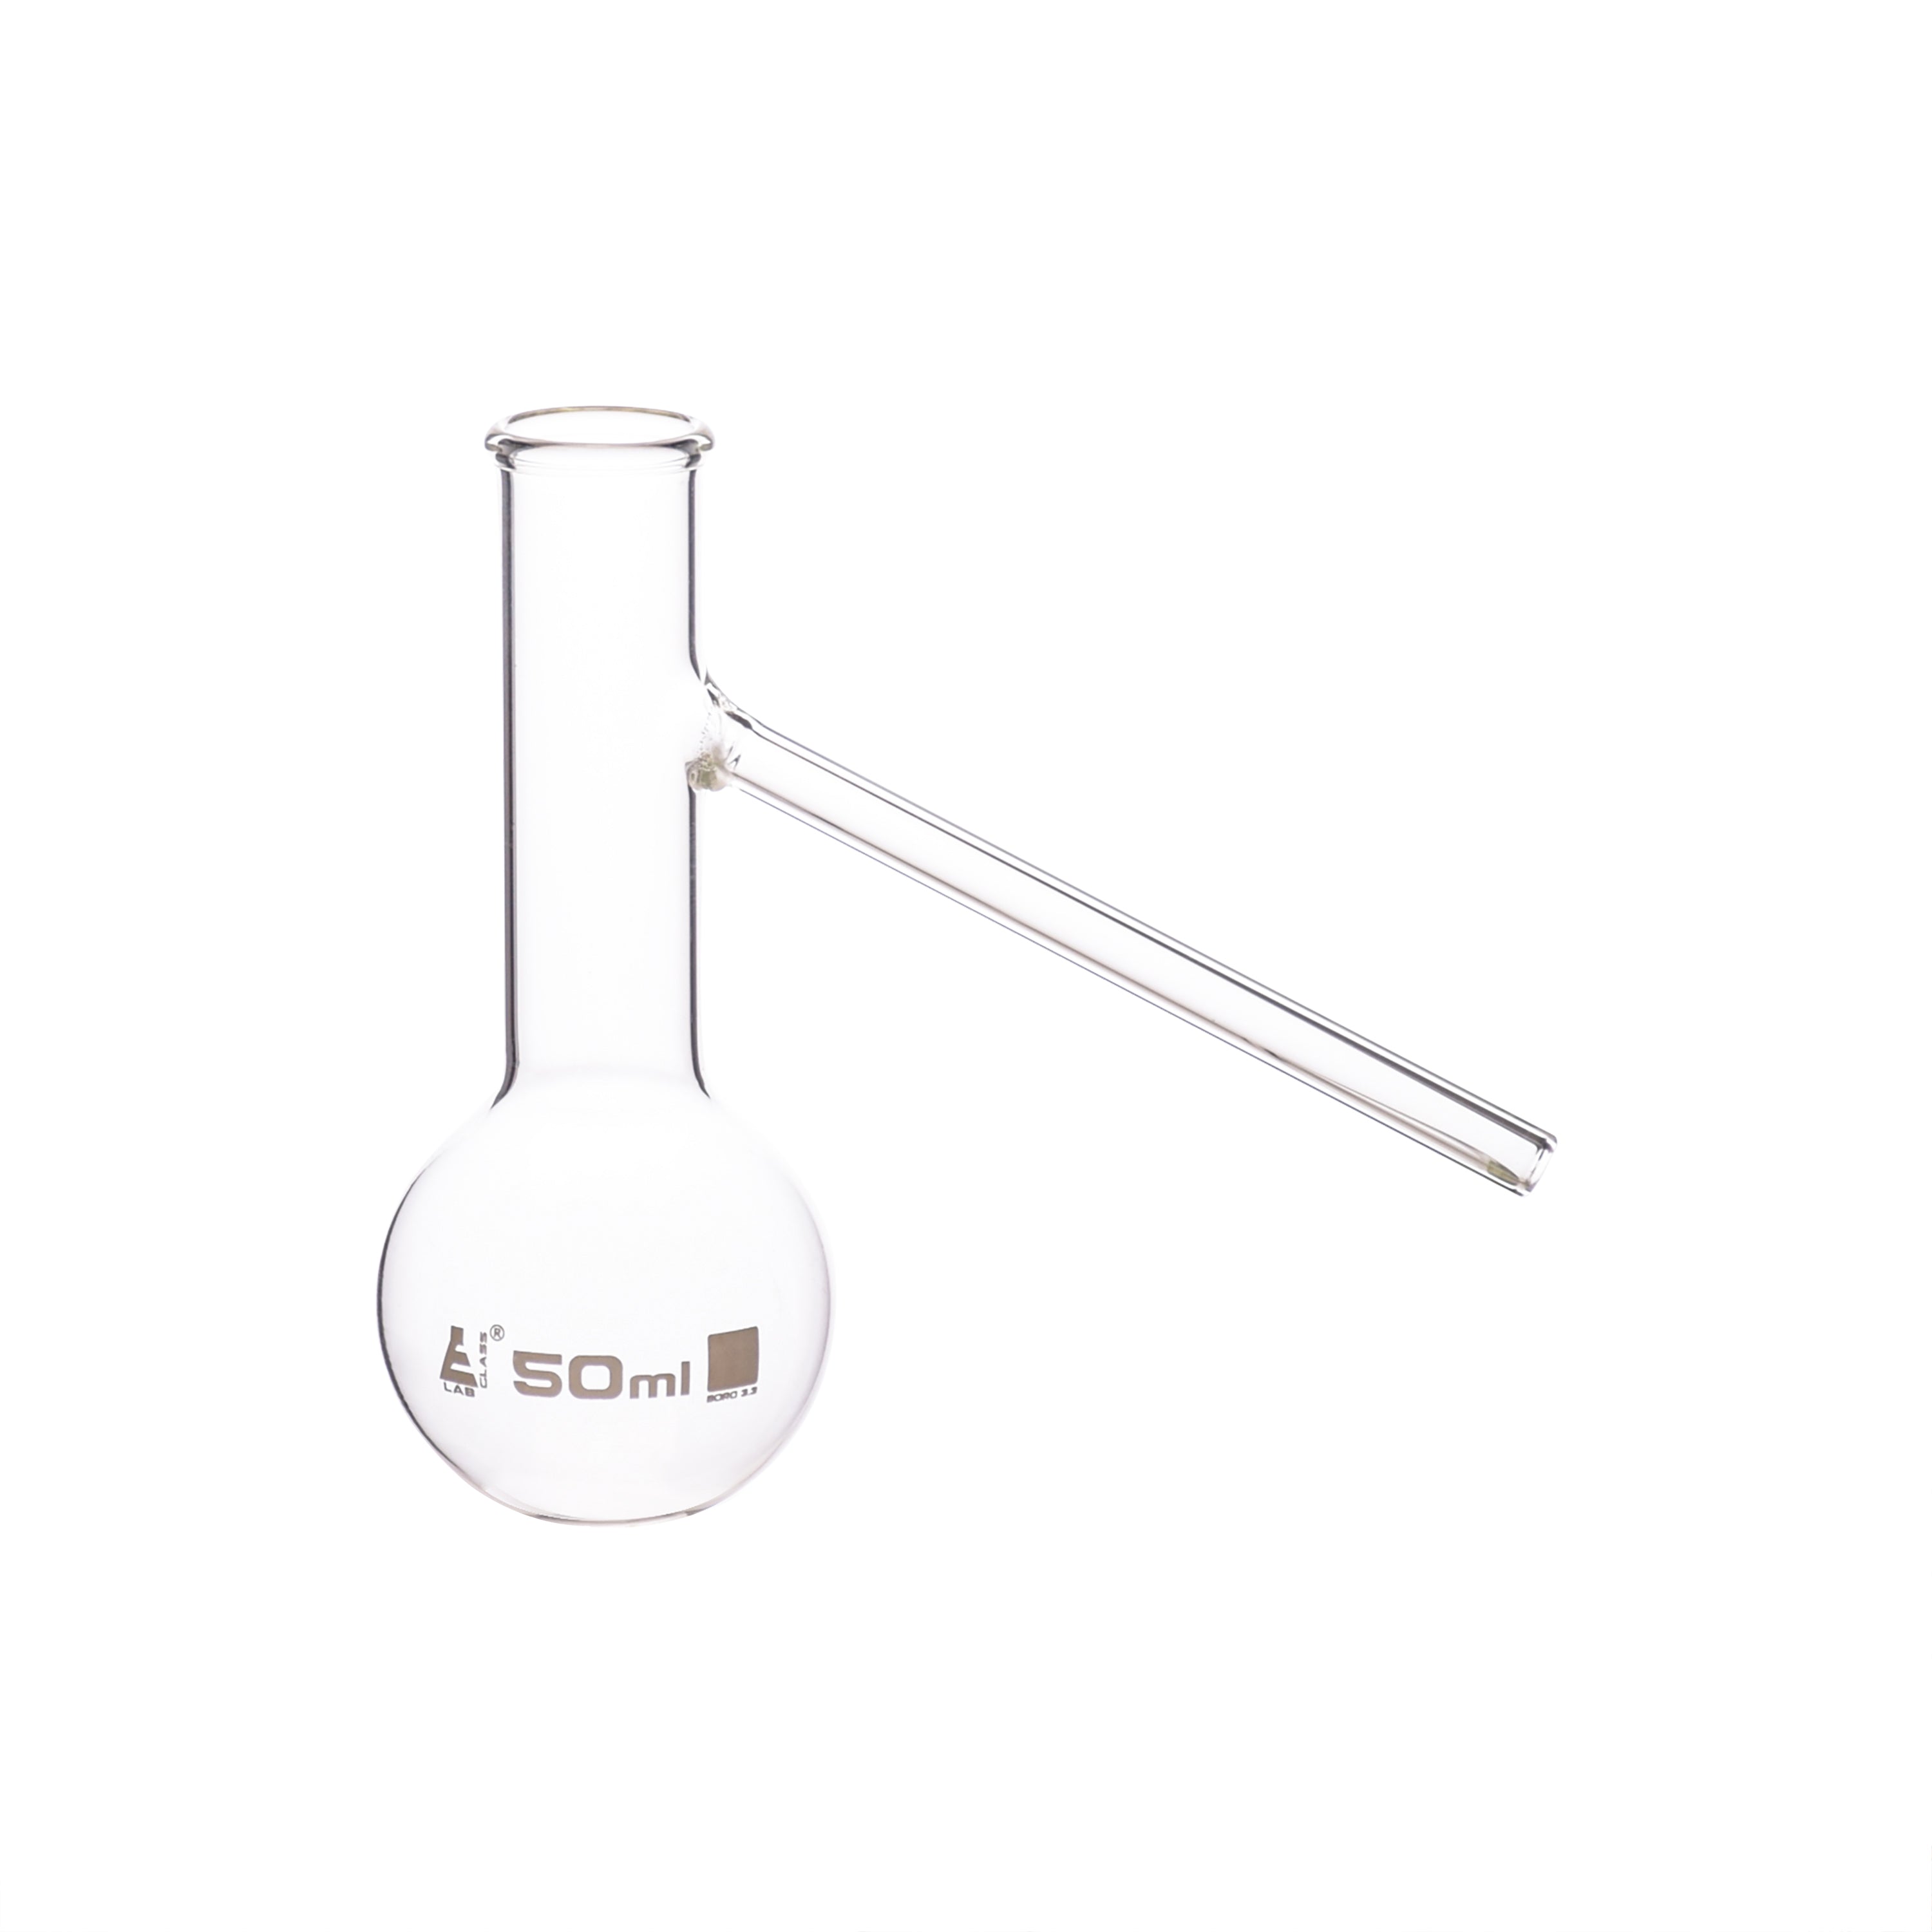 Borosilicate Round Bottom Distilling Flask with Side Arm, 50ml, Autoclavable